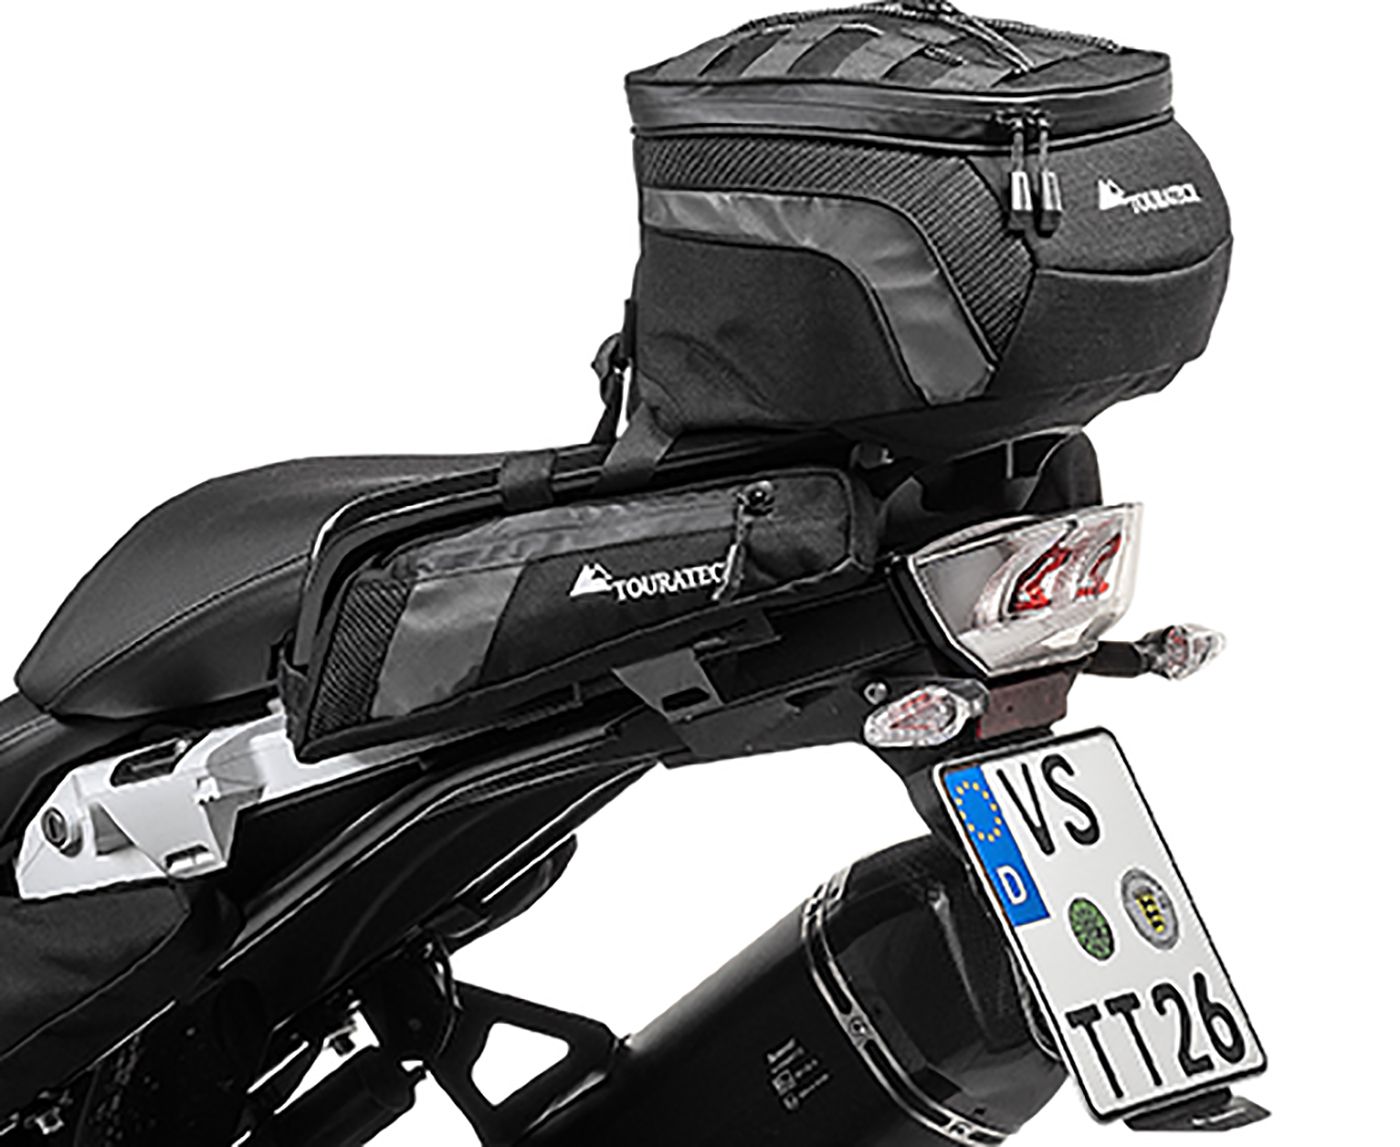 Luggage rack side bags Touring